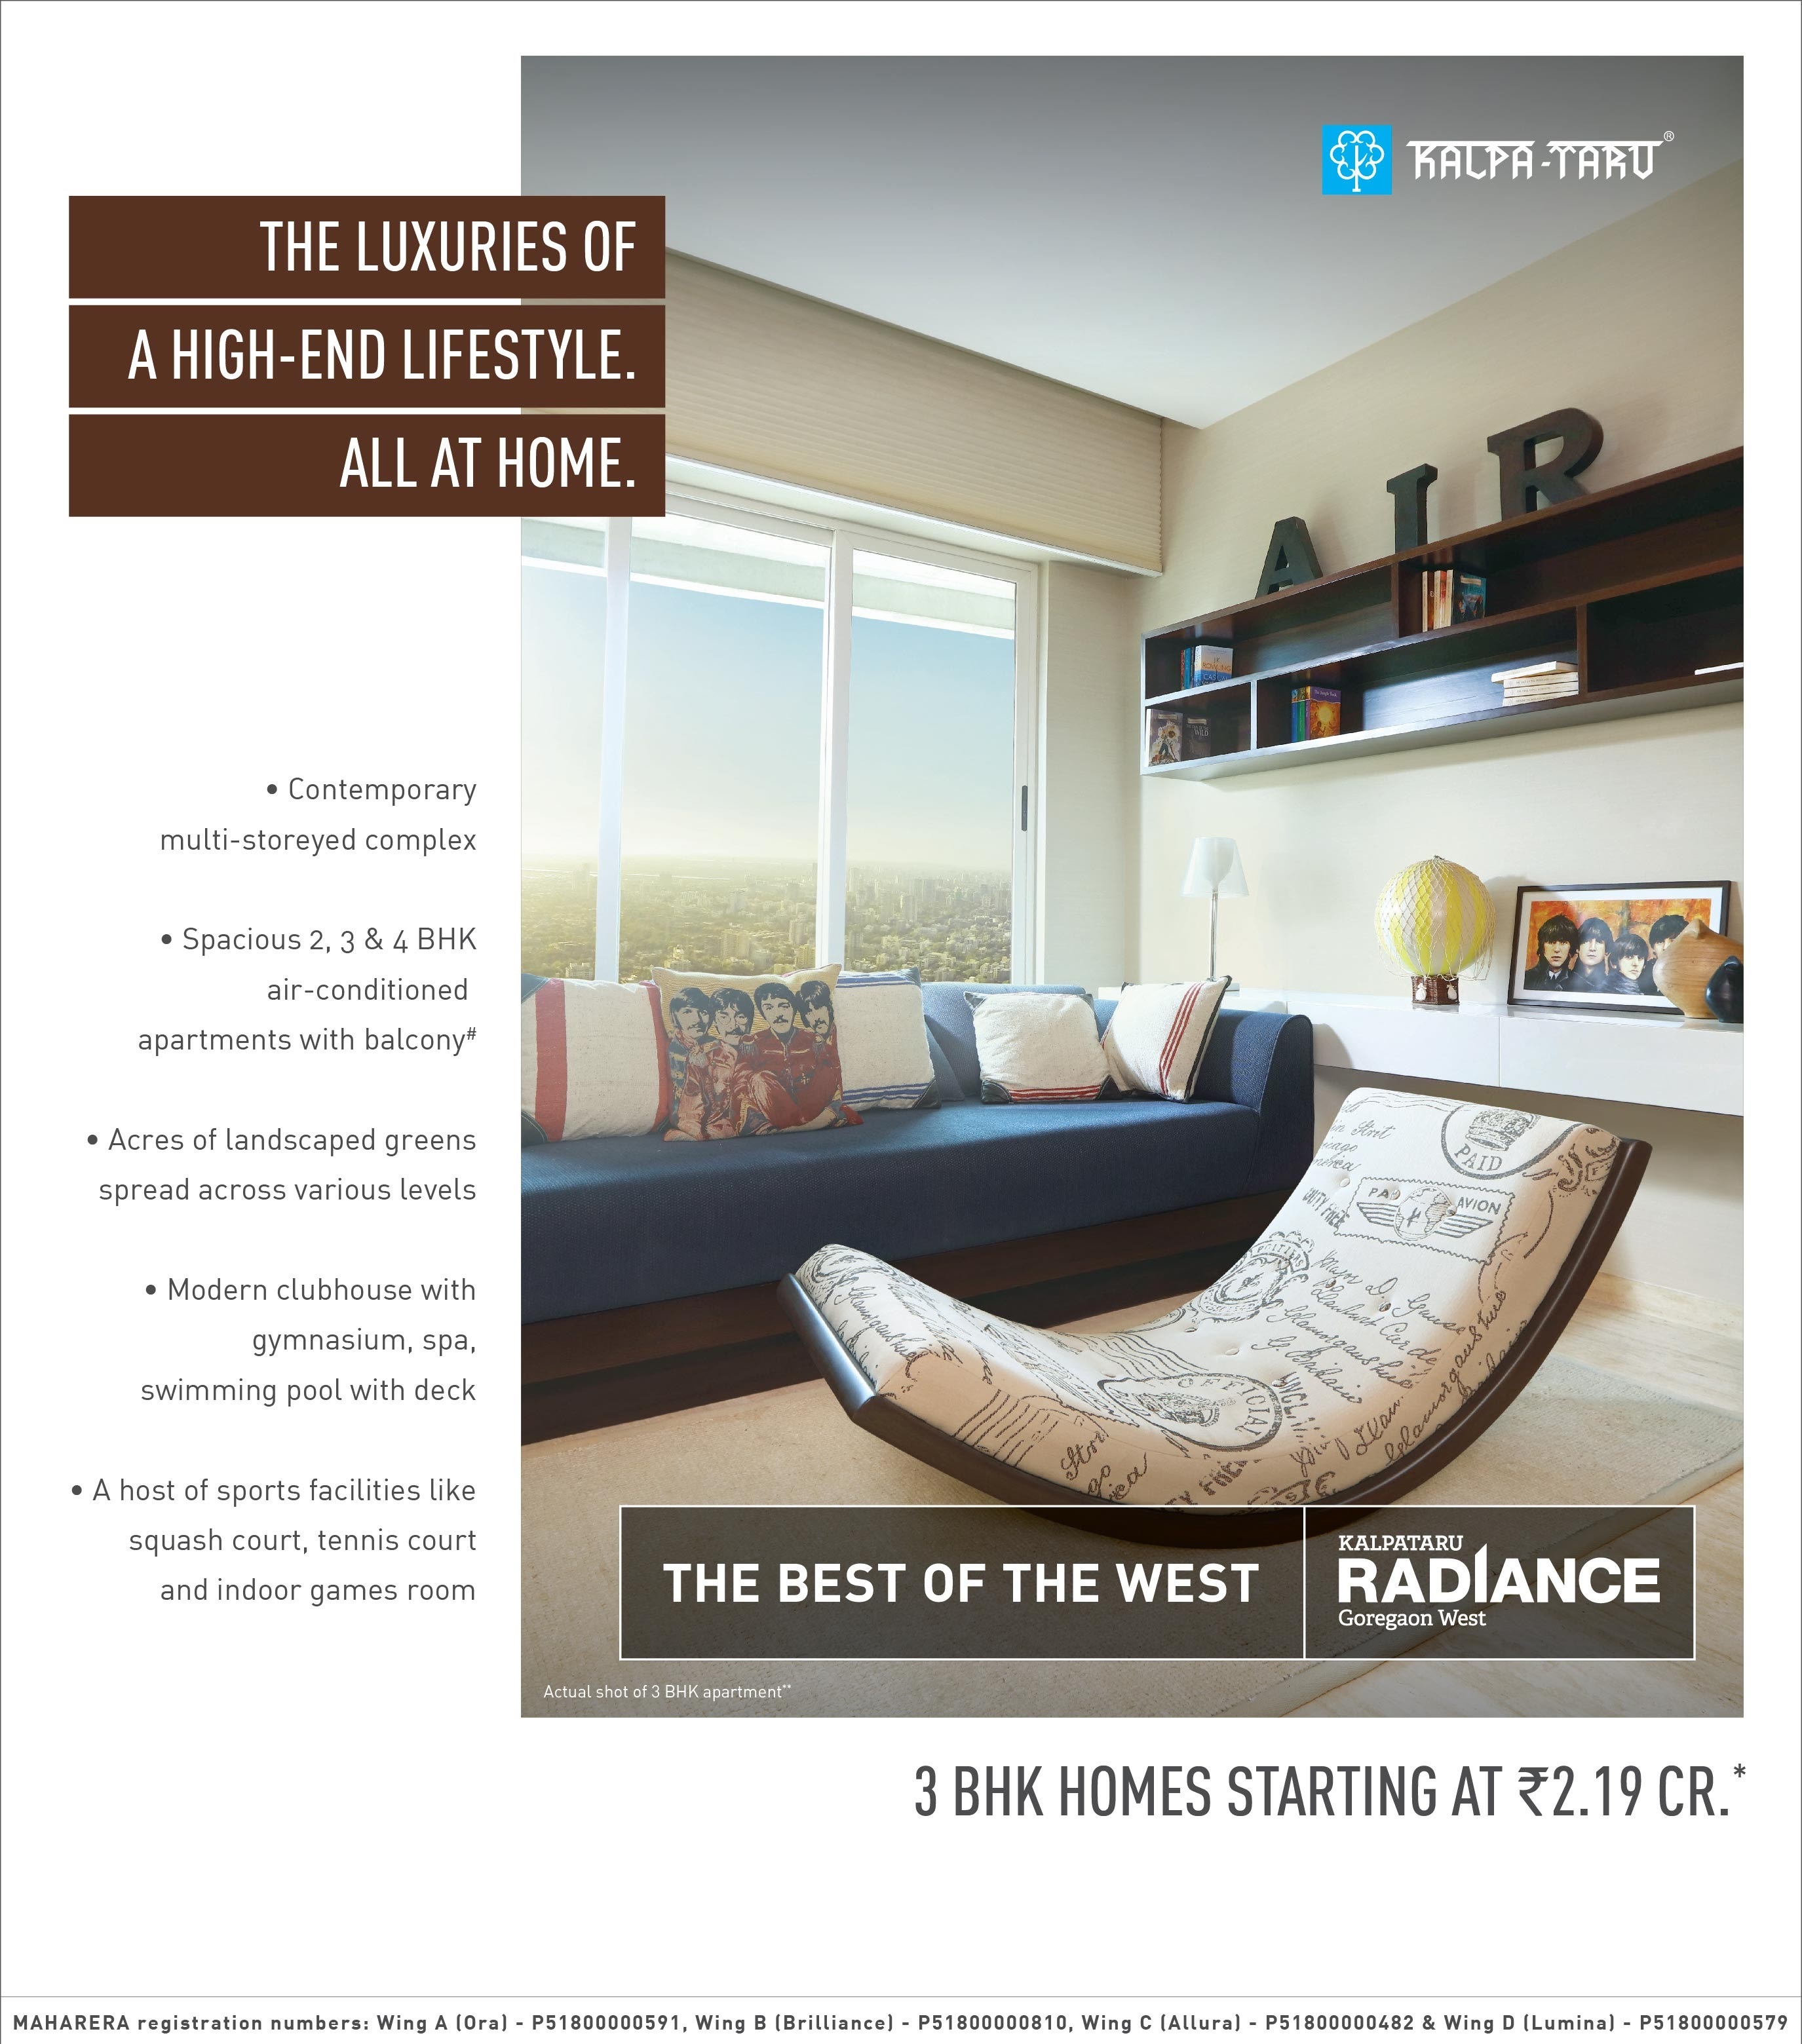 The luxuries of a high-end lifestyle all in home at Kalpataru Radiance in Mumbai